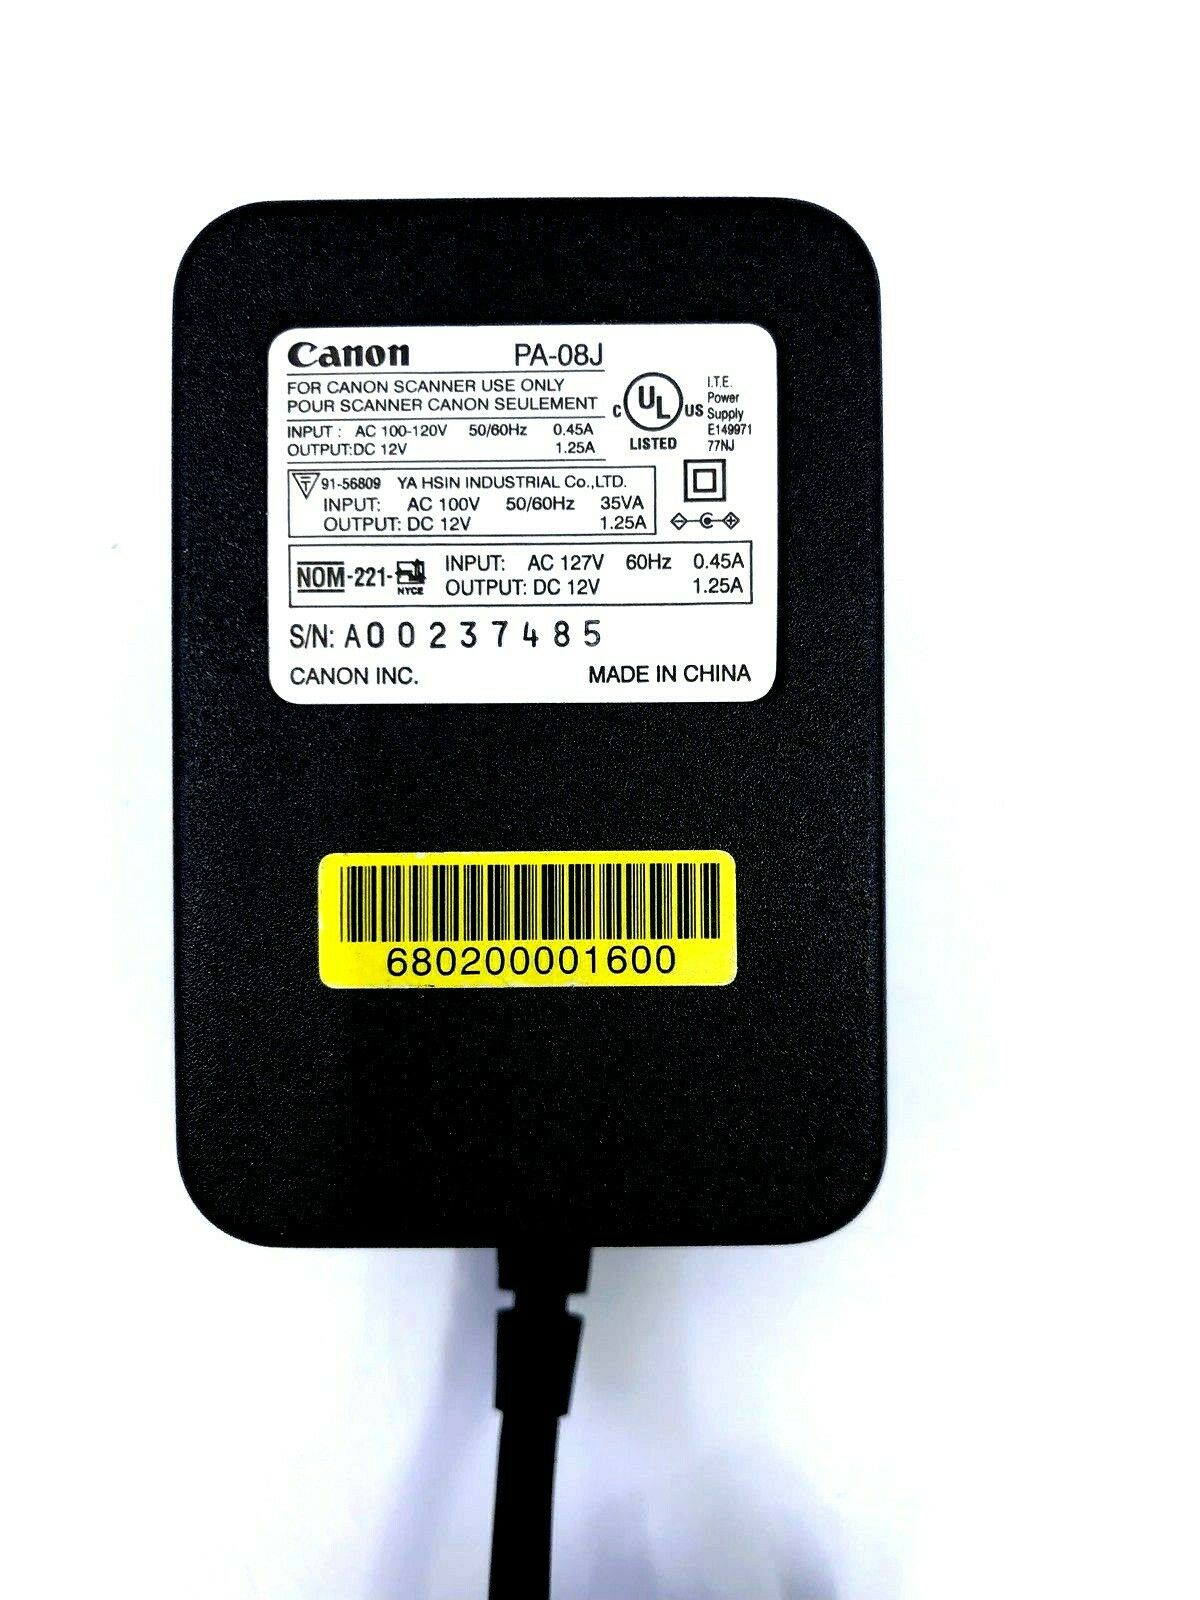 NEW Canon PA-08J ITE Power Supply AC Adapter 12VDC 1.25A for 5000F Scanner